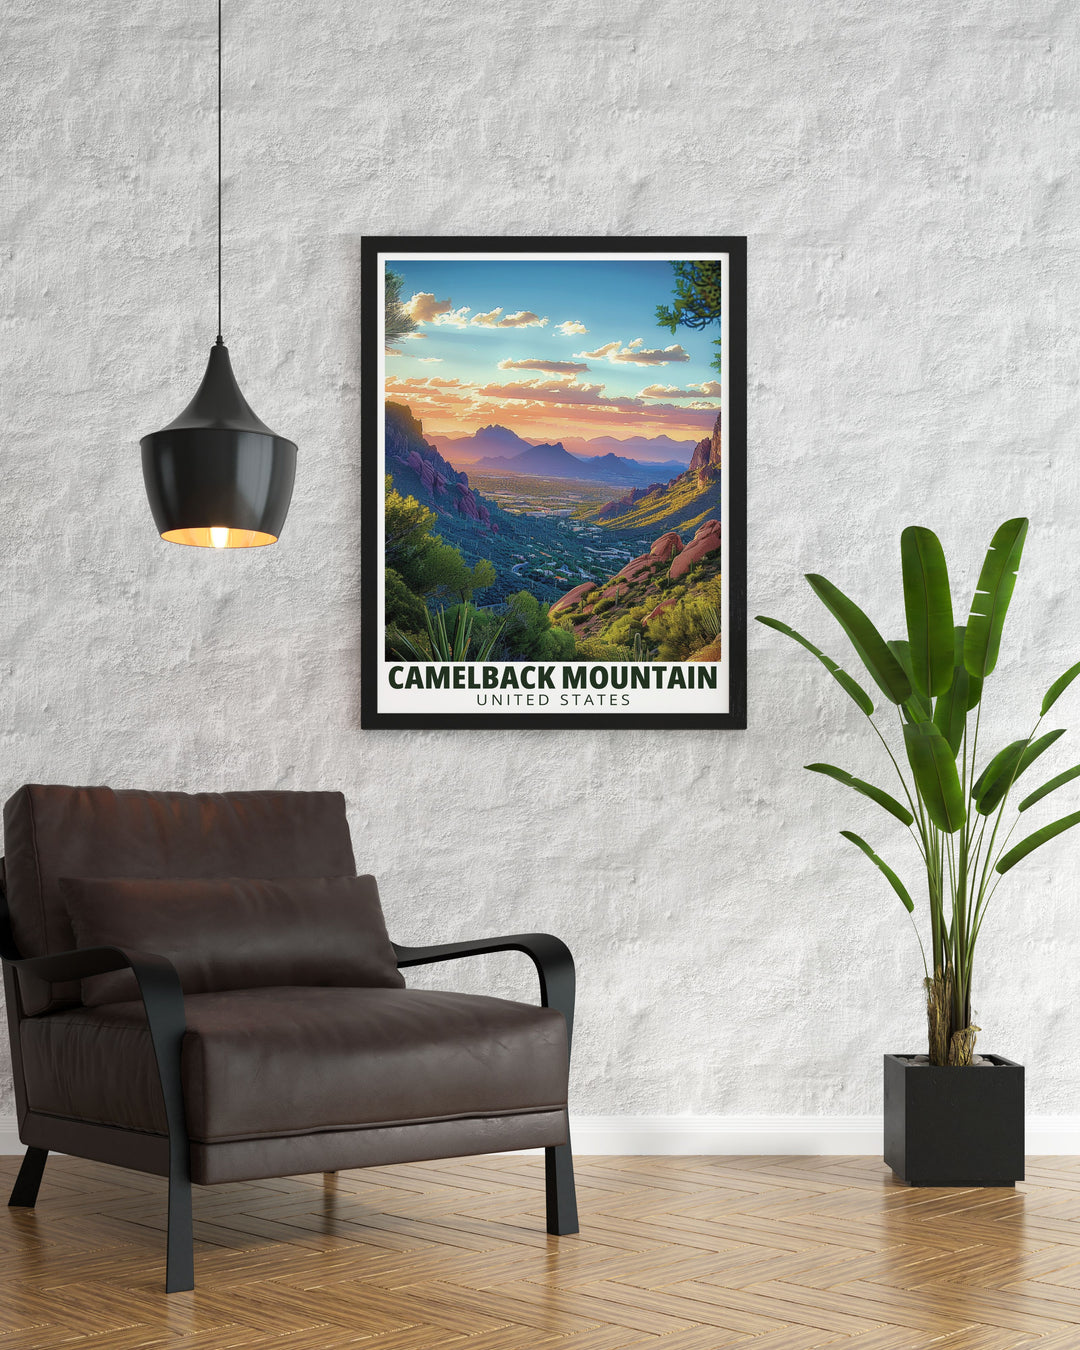 Capture the essence of Arizona with this stunning Summit View vintage print. Ideal for home decor or as a gift this Arizona travel art piece showcases the breathtaking views of Mt. Camelback and the unique beauty of Summit View.